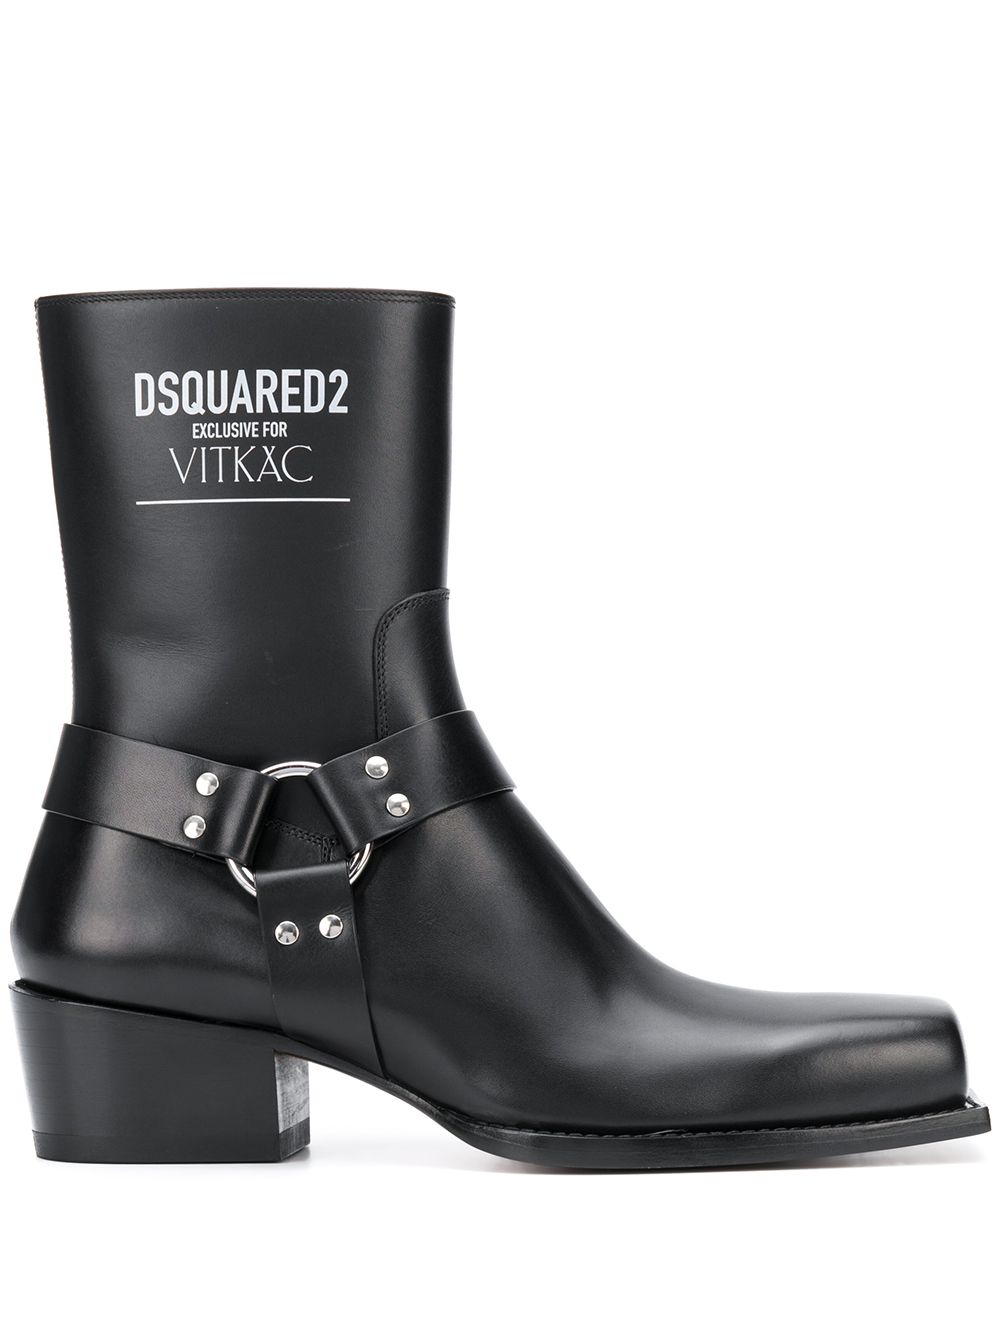 Dsquared2 Exclusive for Vitkac ankle boots - Black von Dsquared2